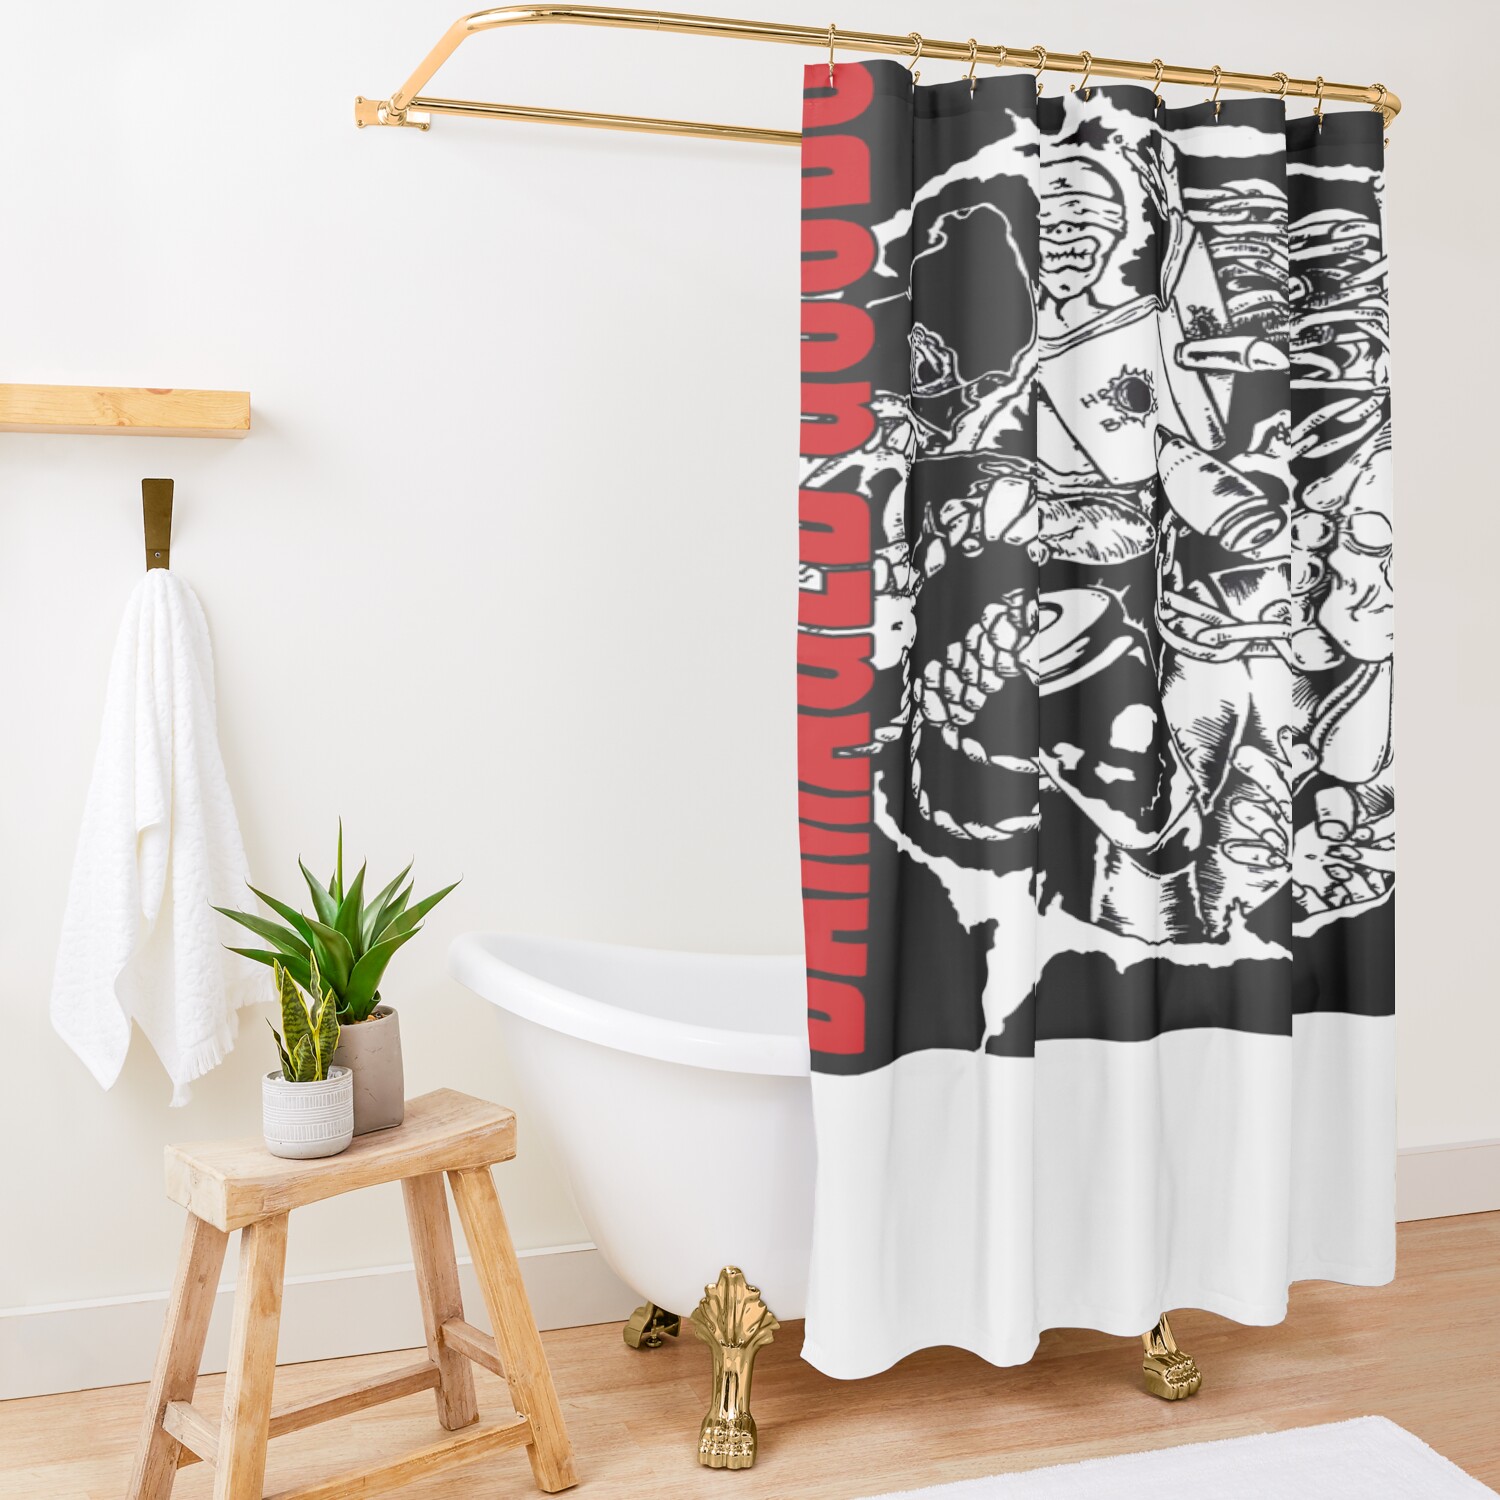 urshower curtain opensquare1500x1500 7 - Knocked Loose Shop